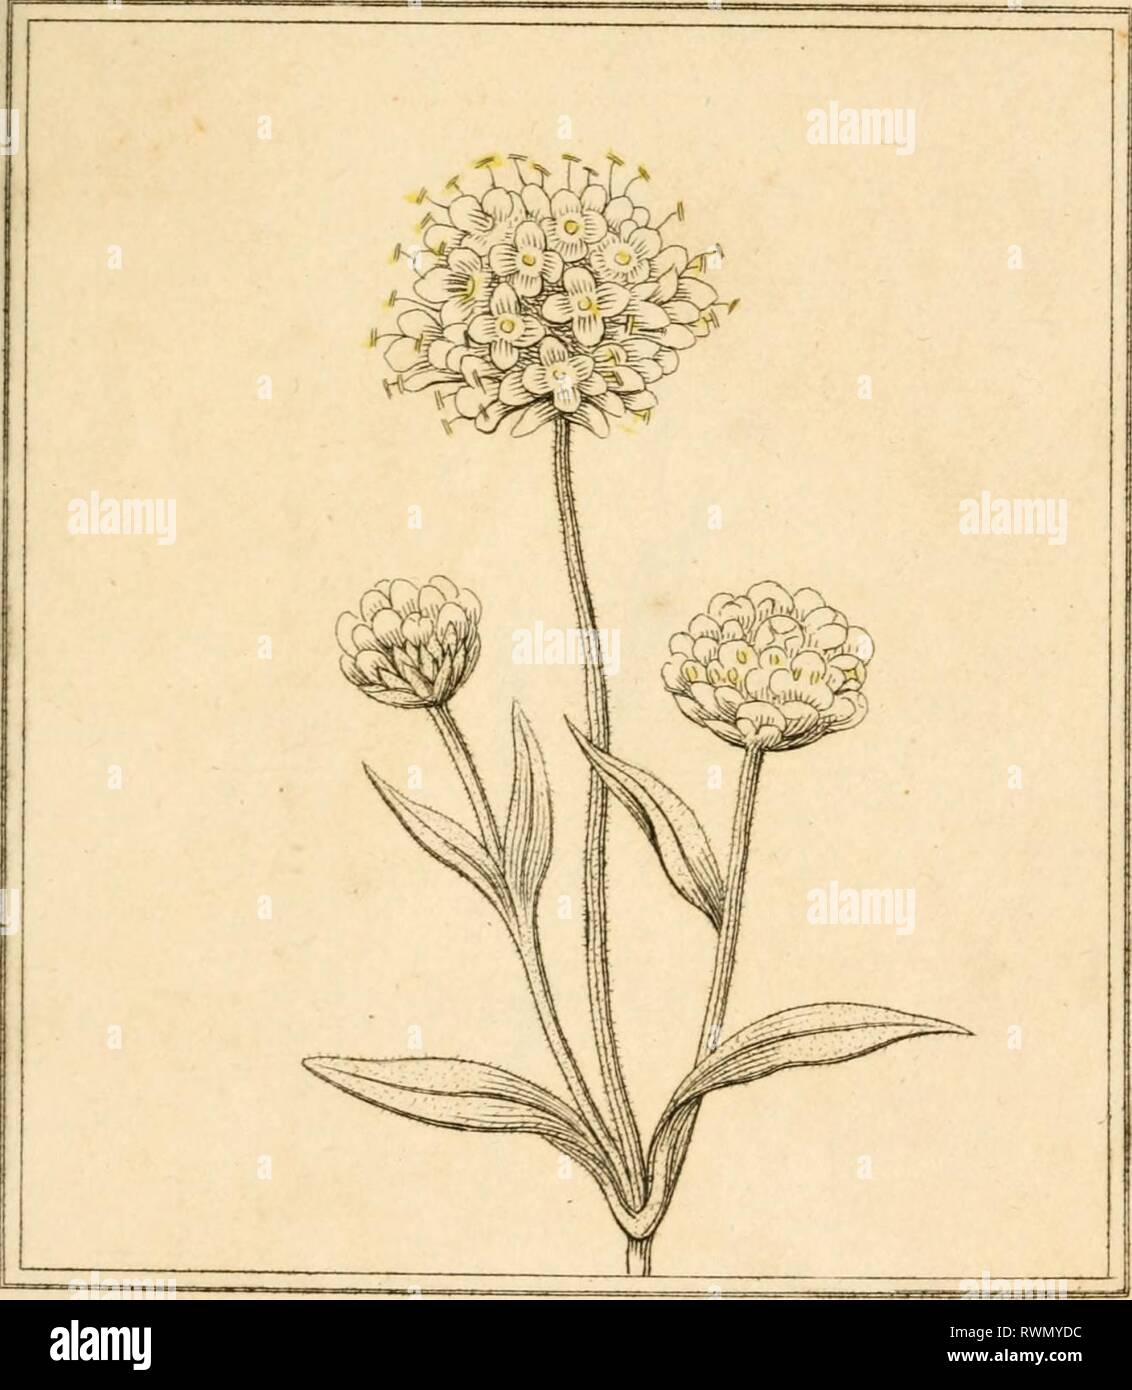 Elements of the science of Elements of the science of botany, as established by Linnaeus; with examples to illustrate the classes and orders of his system elementsofscienc12dupp Year: 1809  CLASS W ORDER 1 I, BEVIESÂ»BIT SCABIOUS JnJ    SCABIOSA SUCCISA sagas â â aaaa Stock Photo